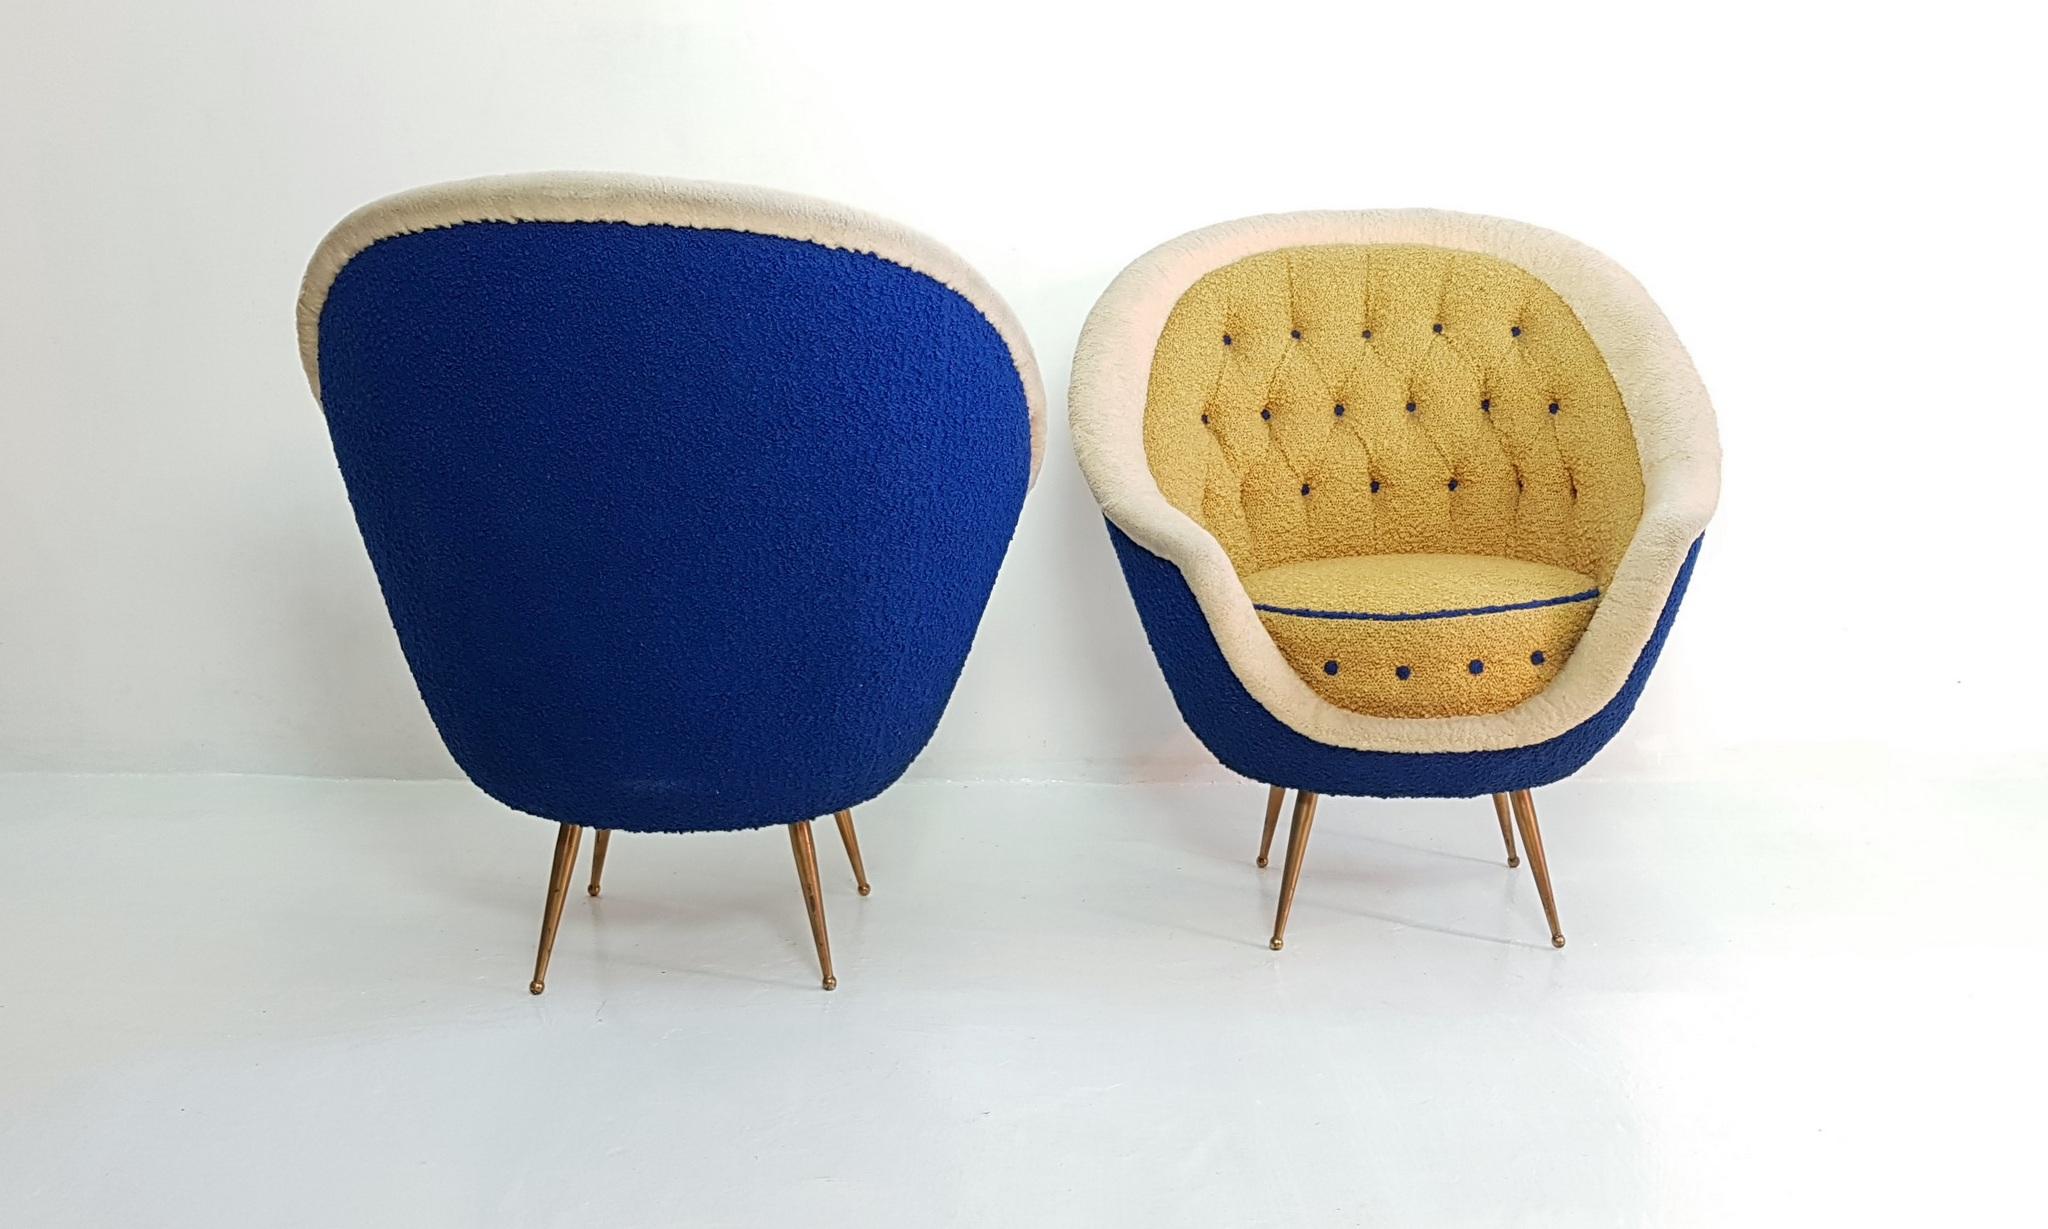 Italian Midcentury Pair of Armchairs with Brass Spider Legs by ISA Bergamo, Italy, 1959